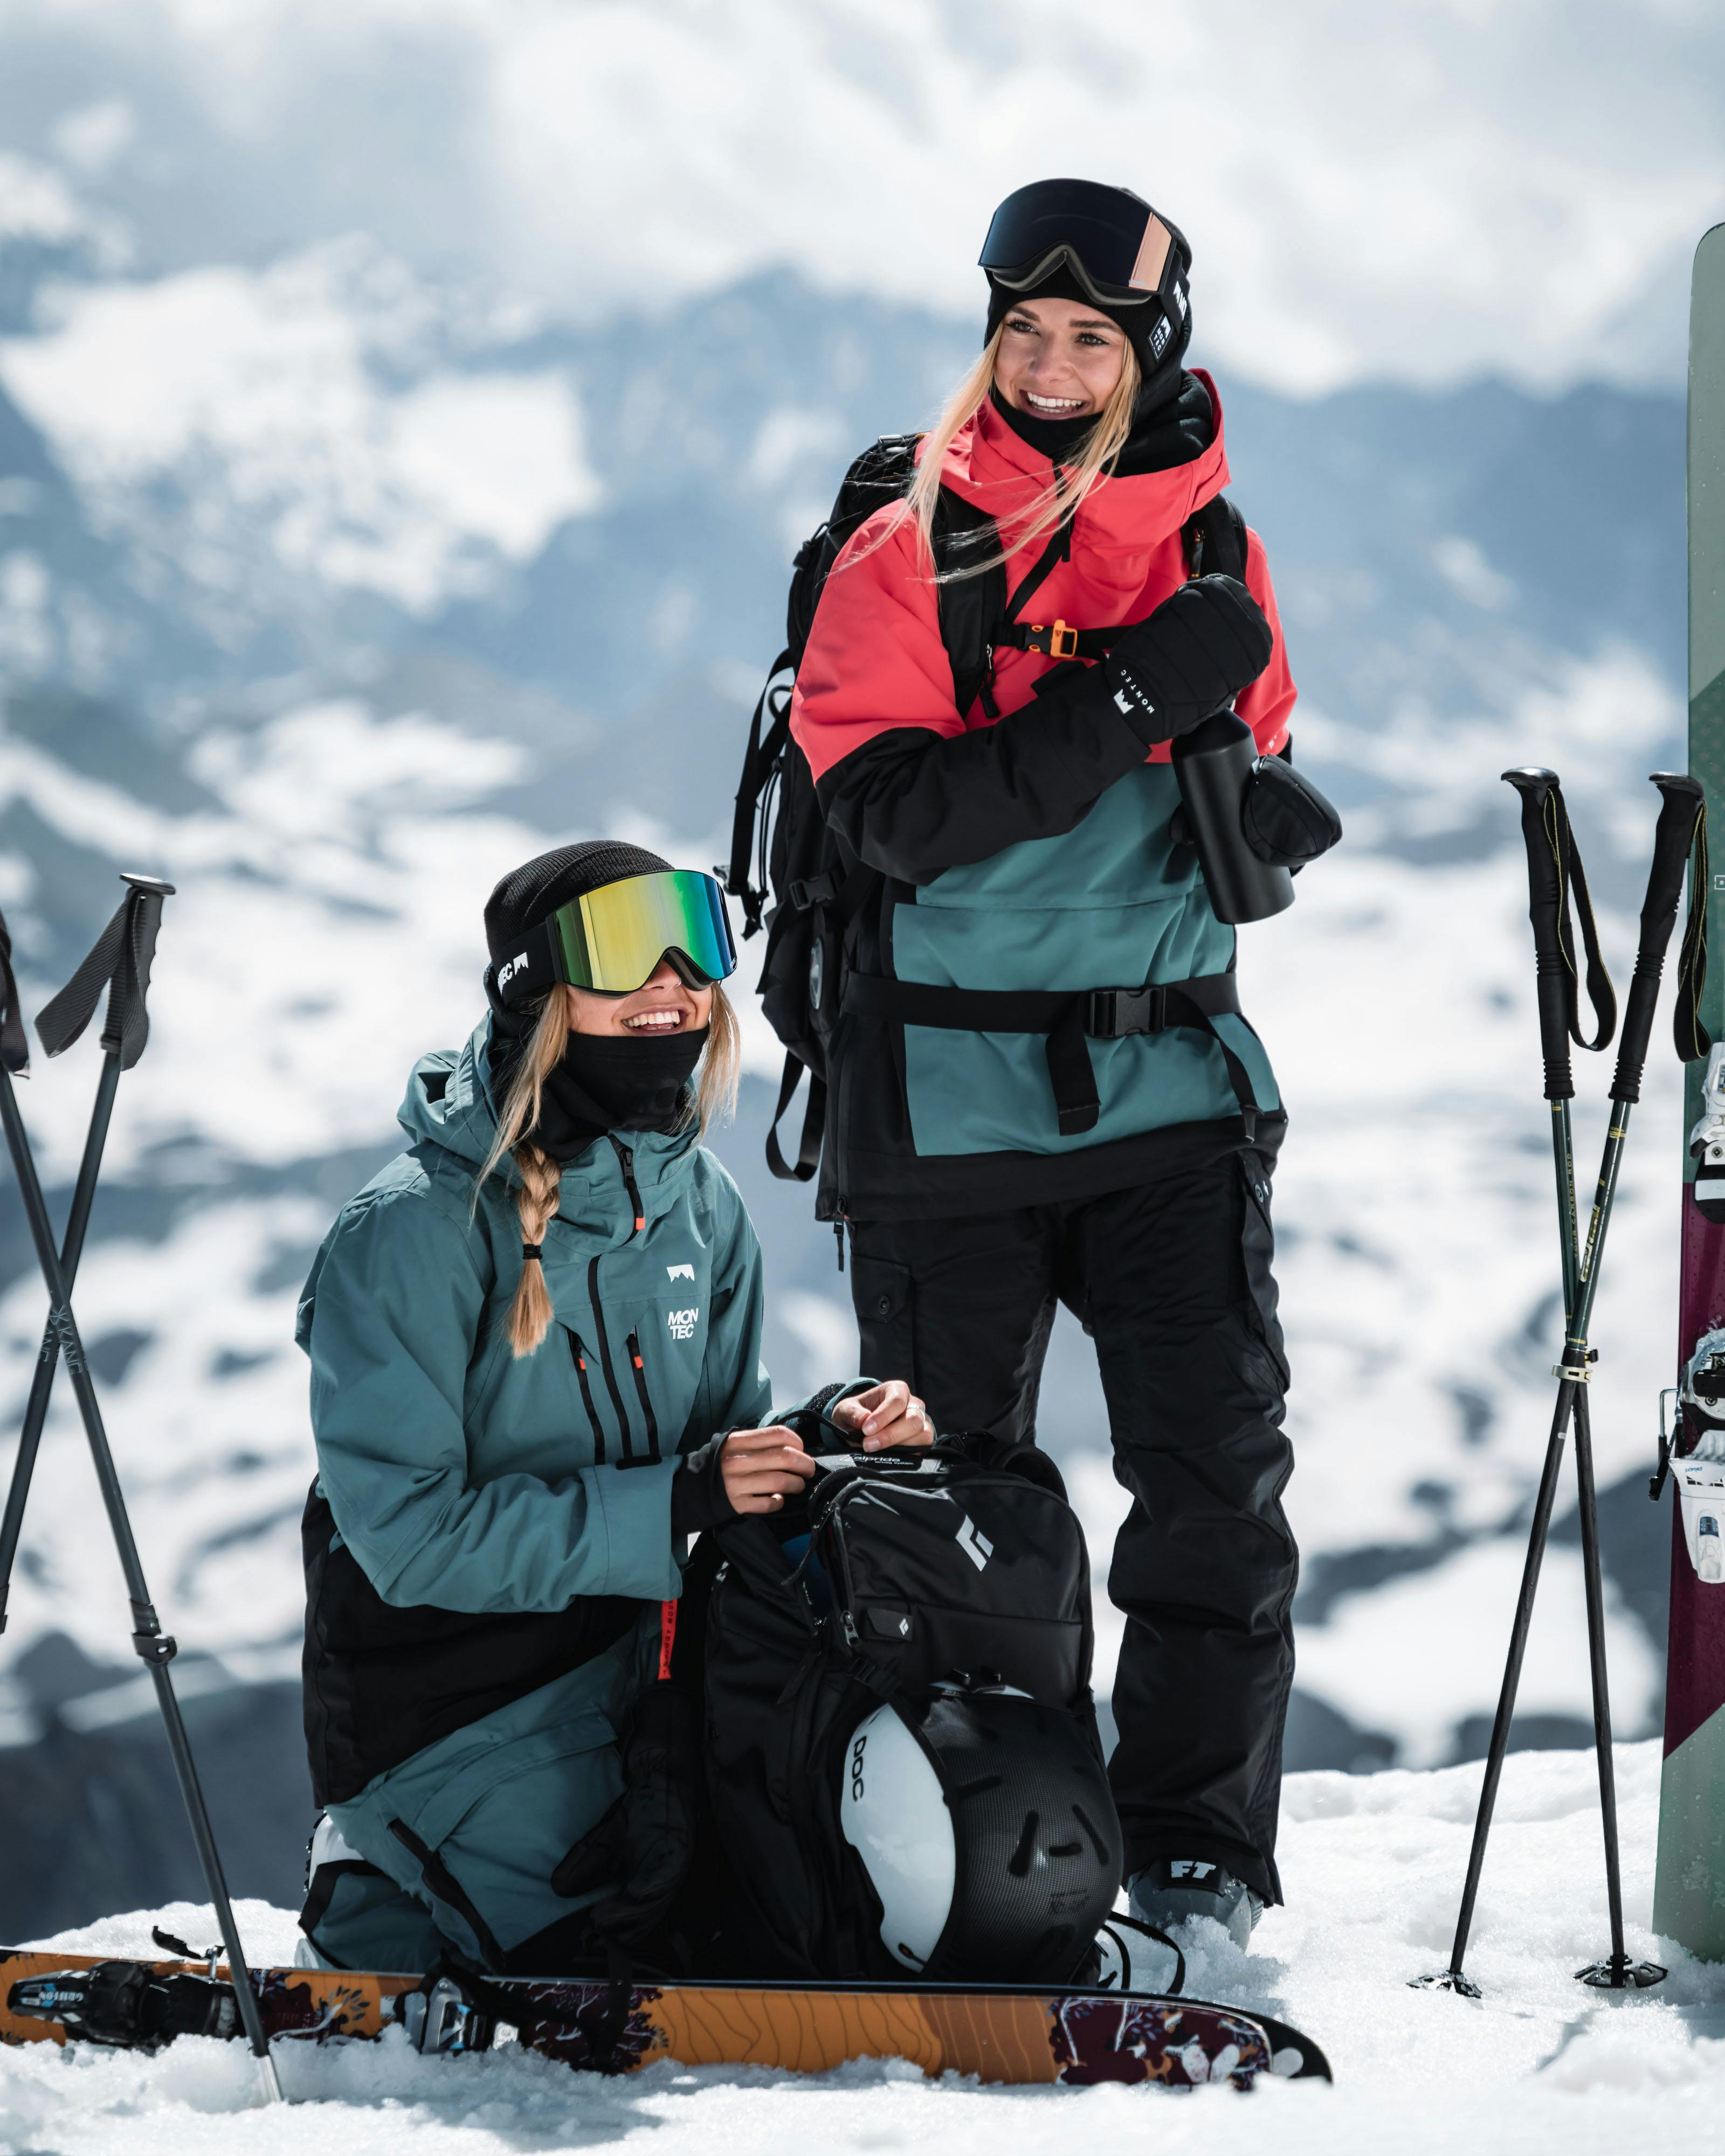 How to check your ski pole size